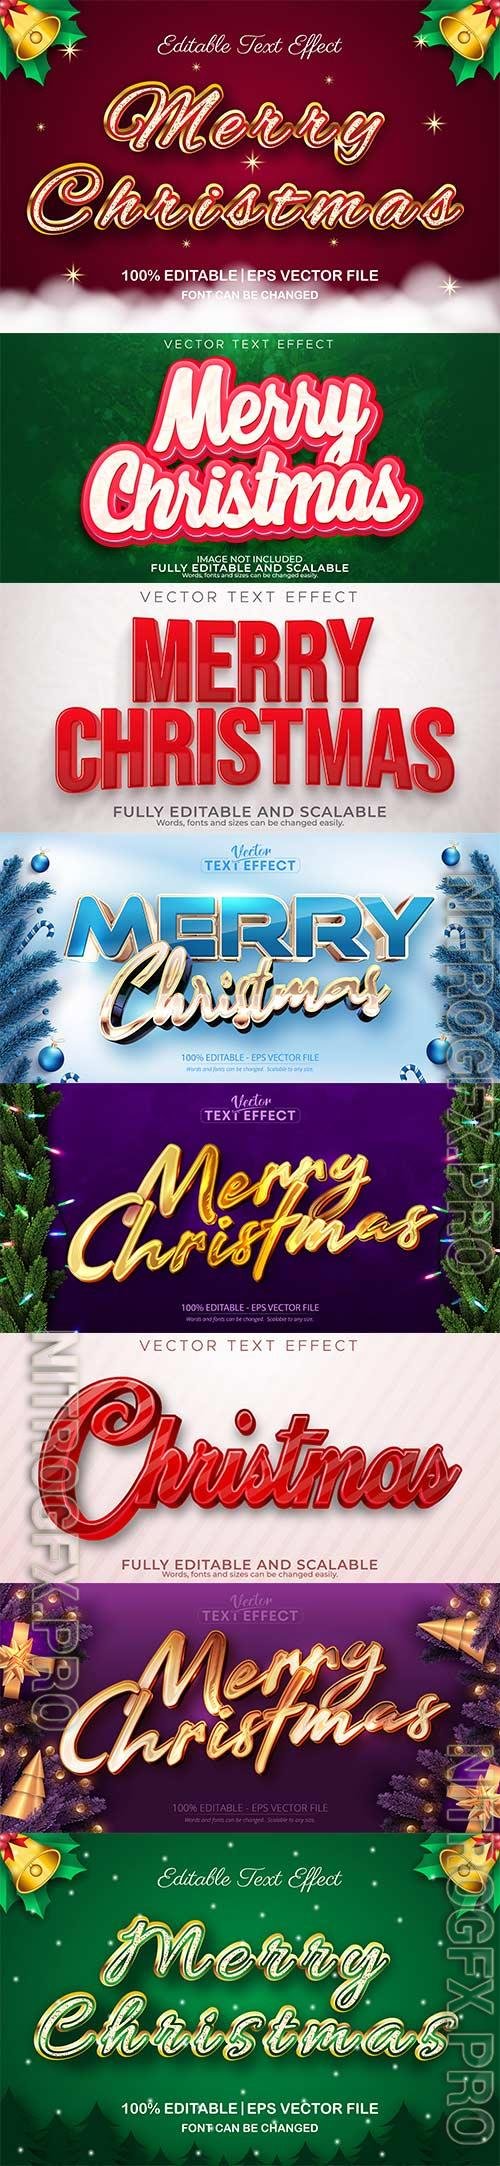 2022 New year and christmas editable text effect vector vol 32